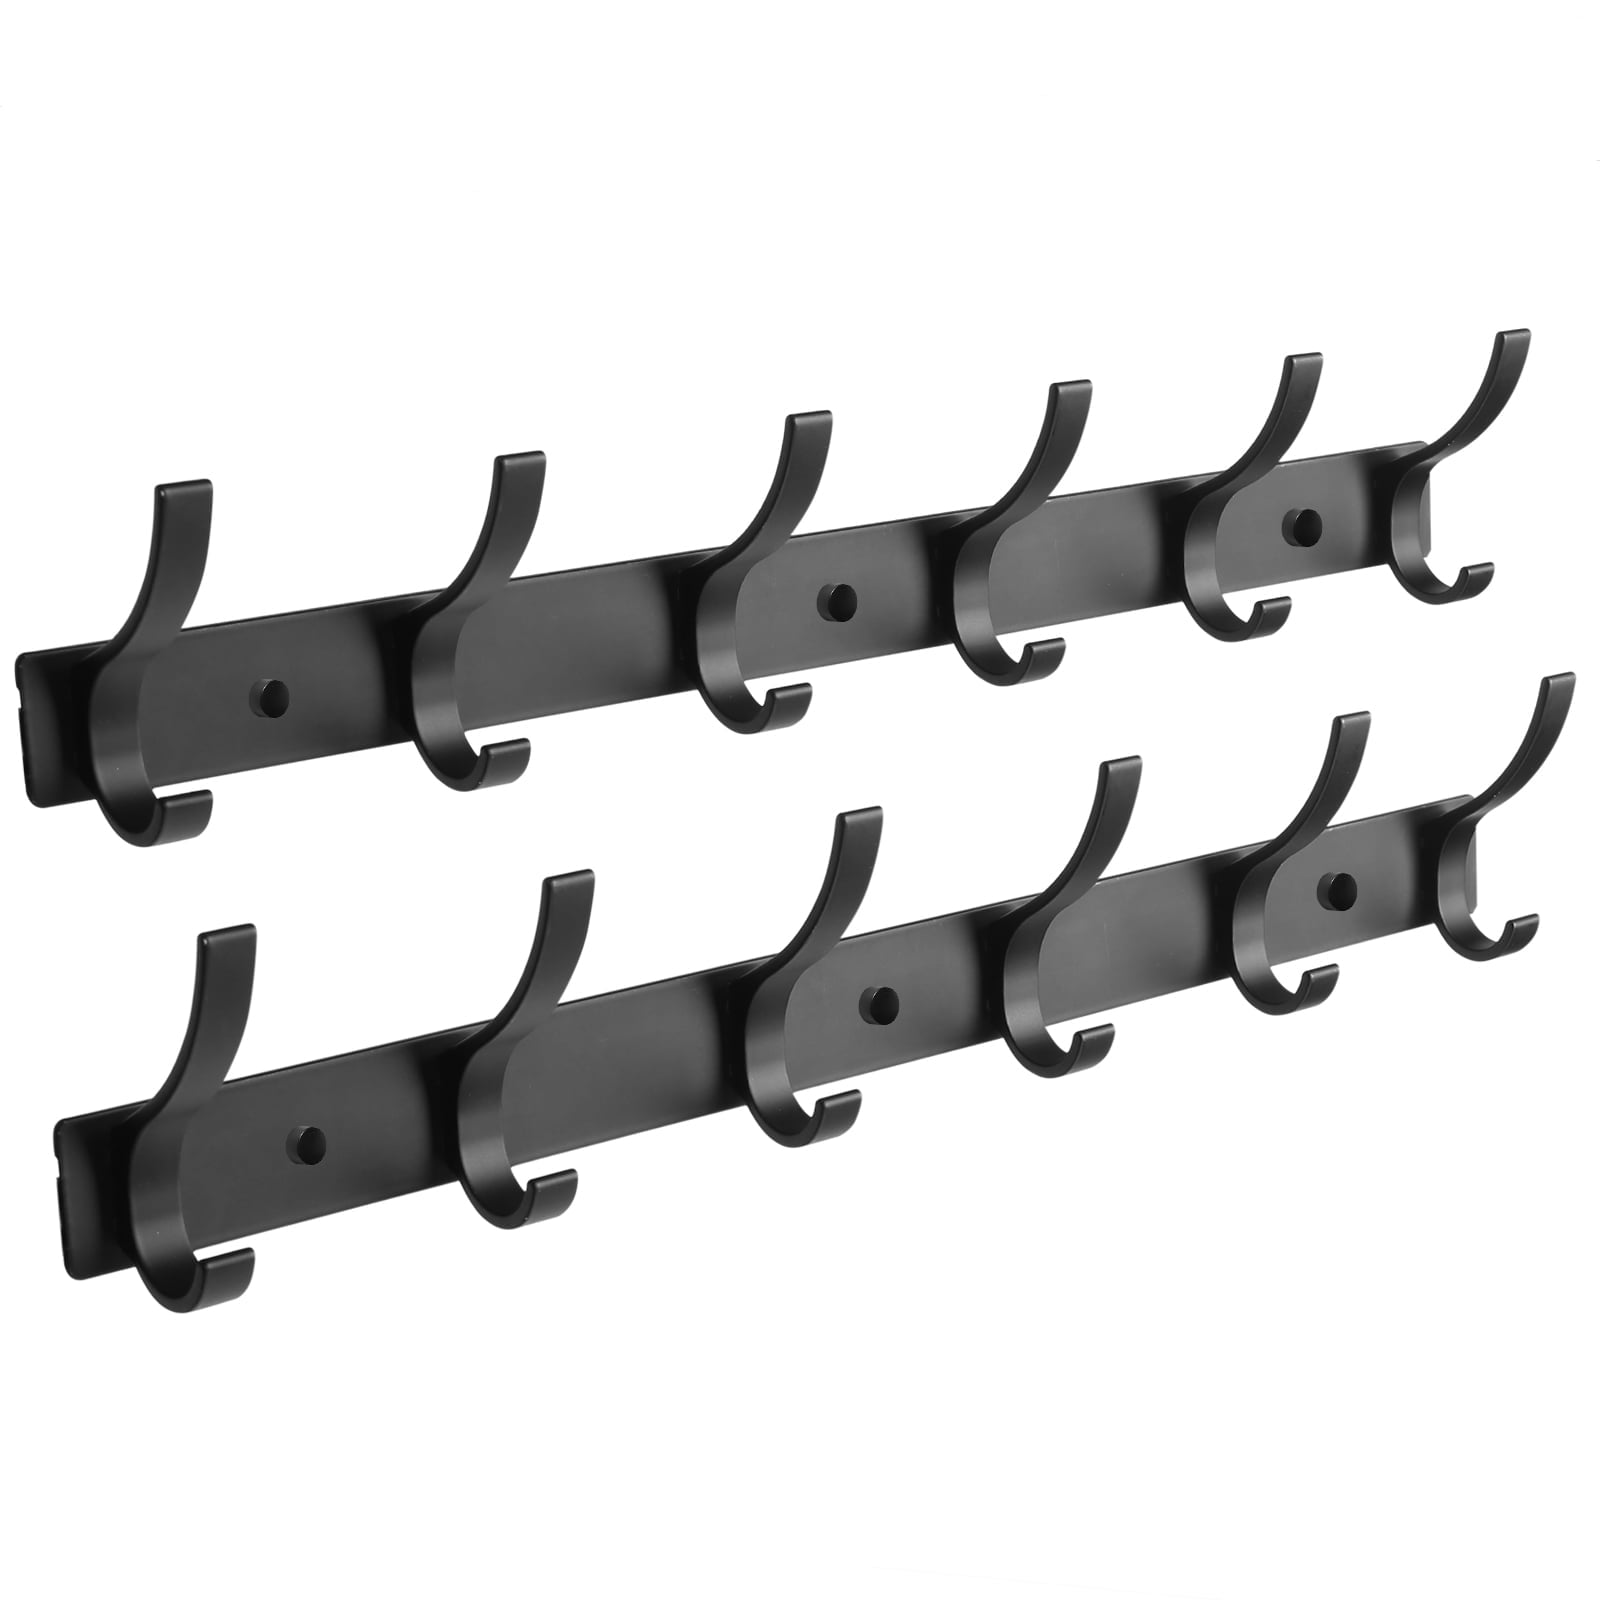 Coat Rack Wall Mounted,5 Tri Hooks For Hanging,hook Rack,hook Rail,coat  Hanger Wall Mount For Jacket,clothes,hats,towel,black